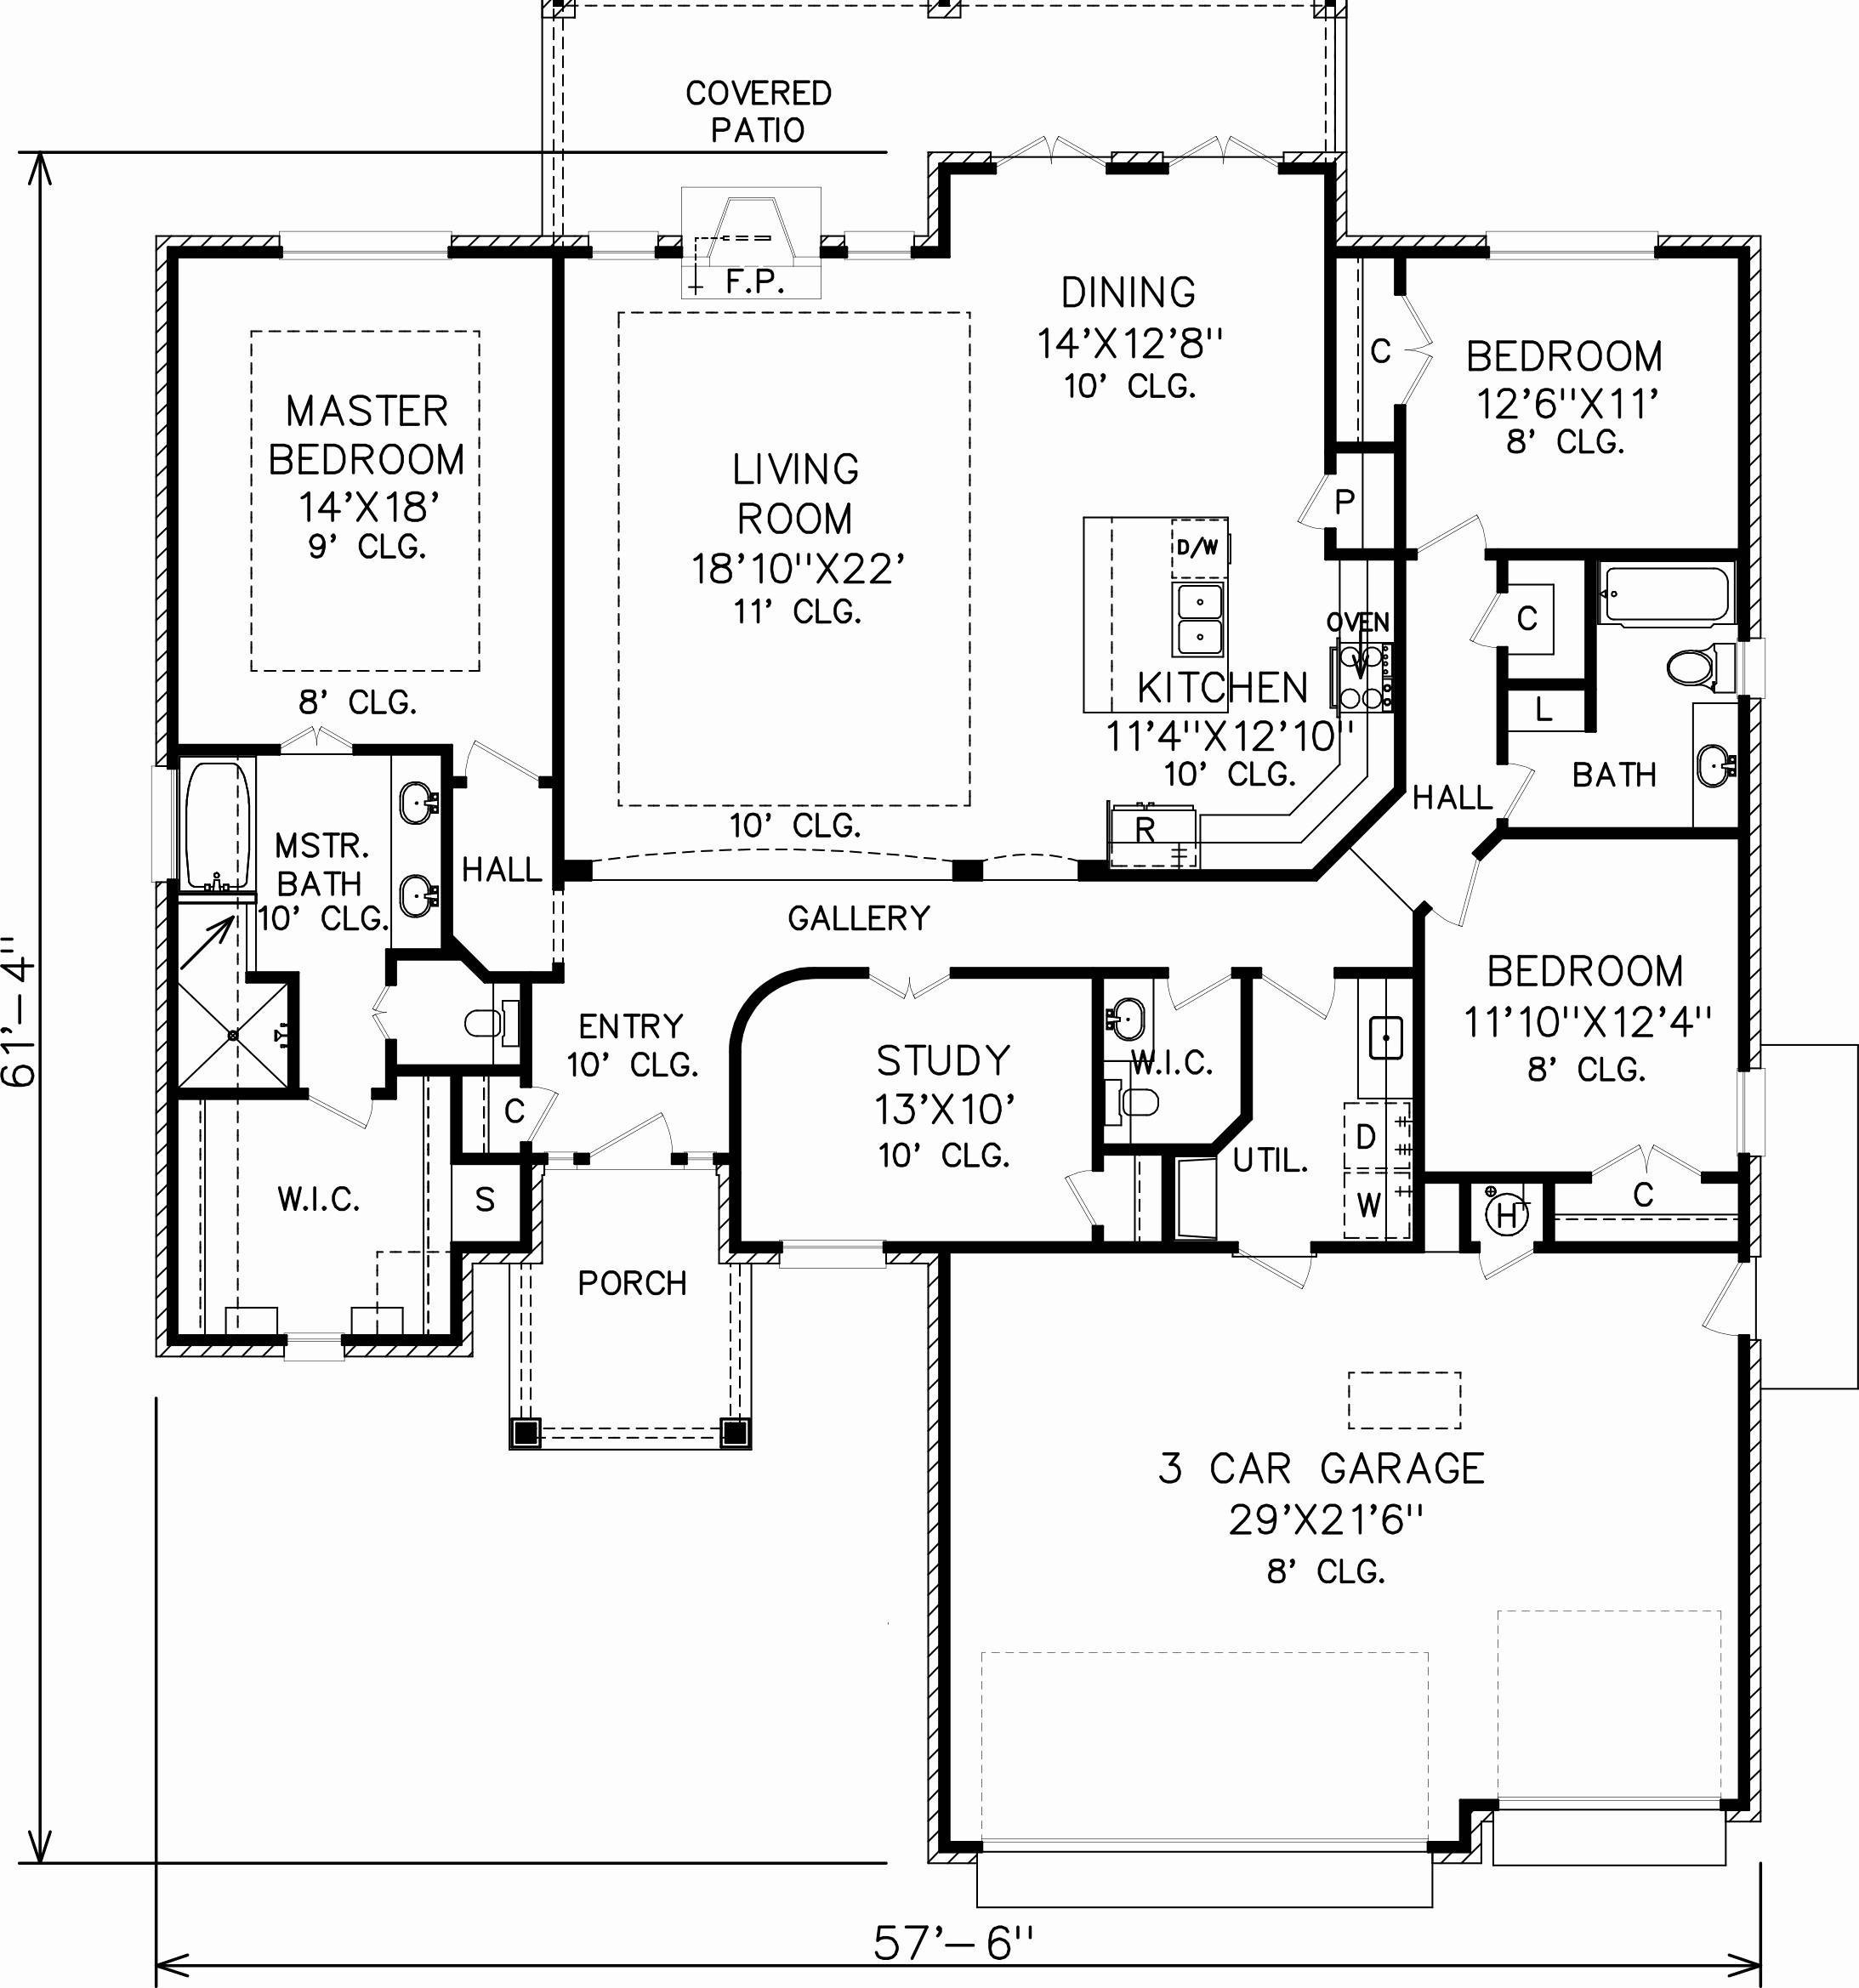 floor plan with dimensions inspirational kitchen floor plan dimensions unique floor plan best long house of floor plan with dimensions